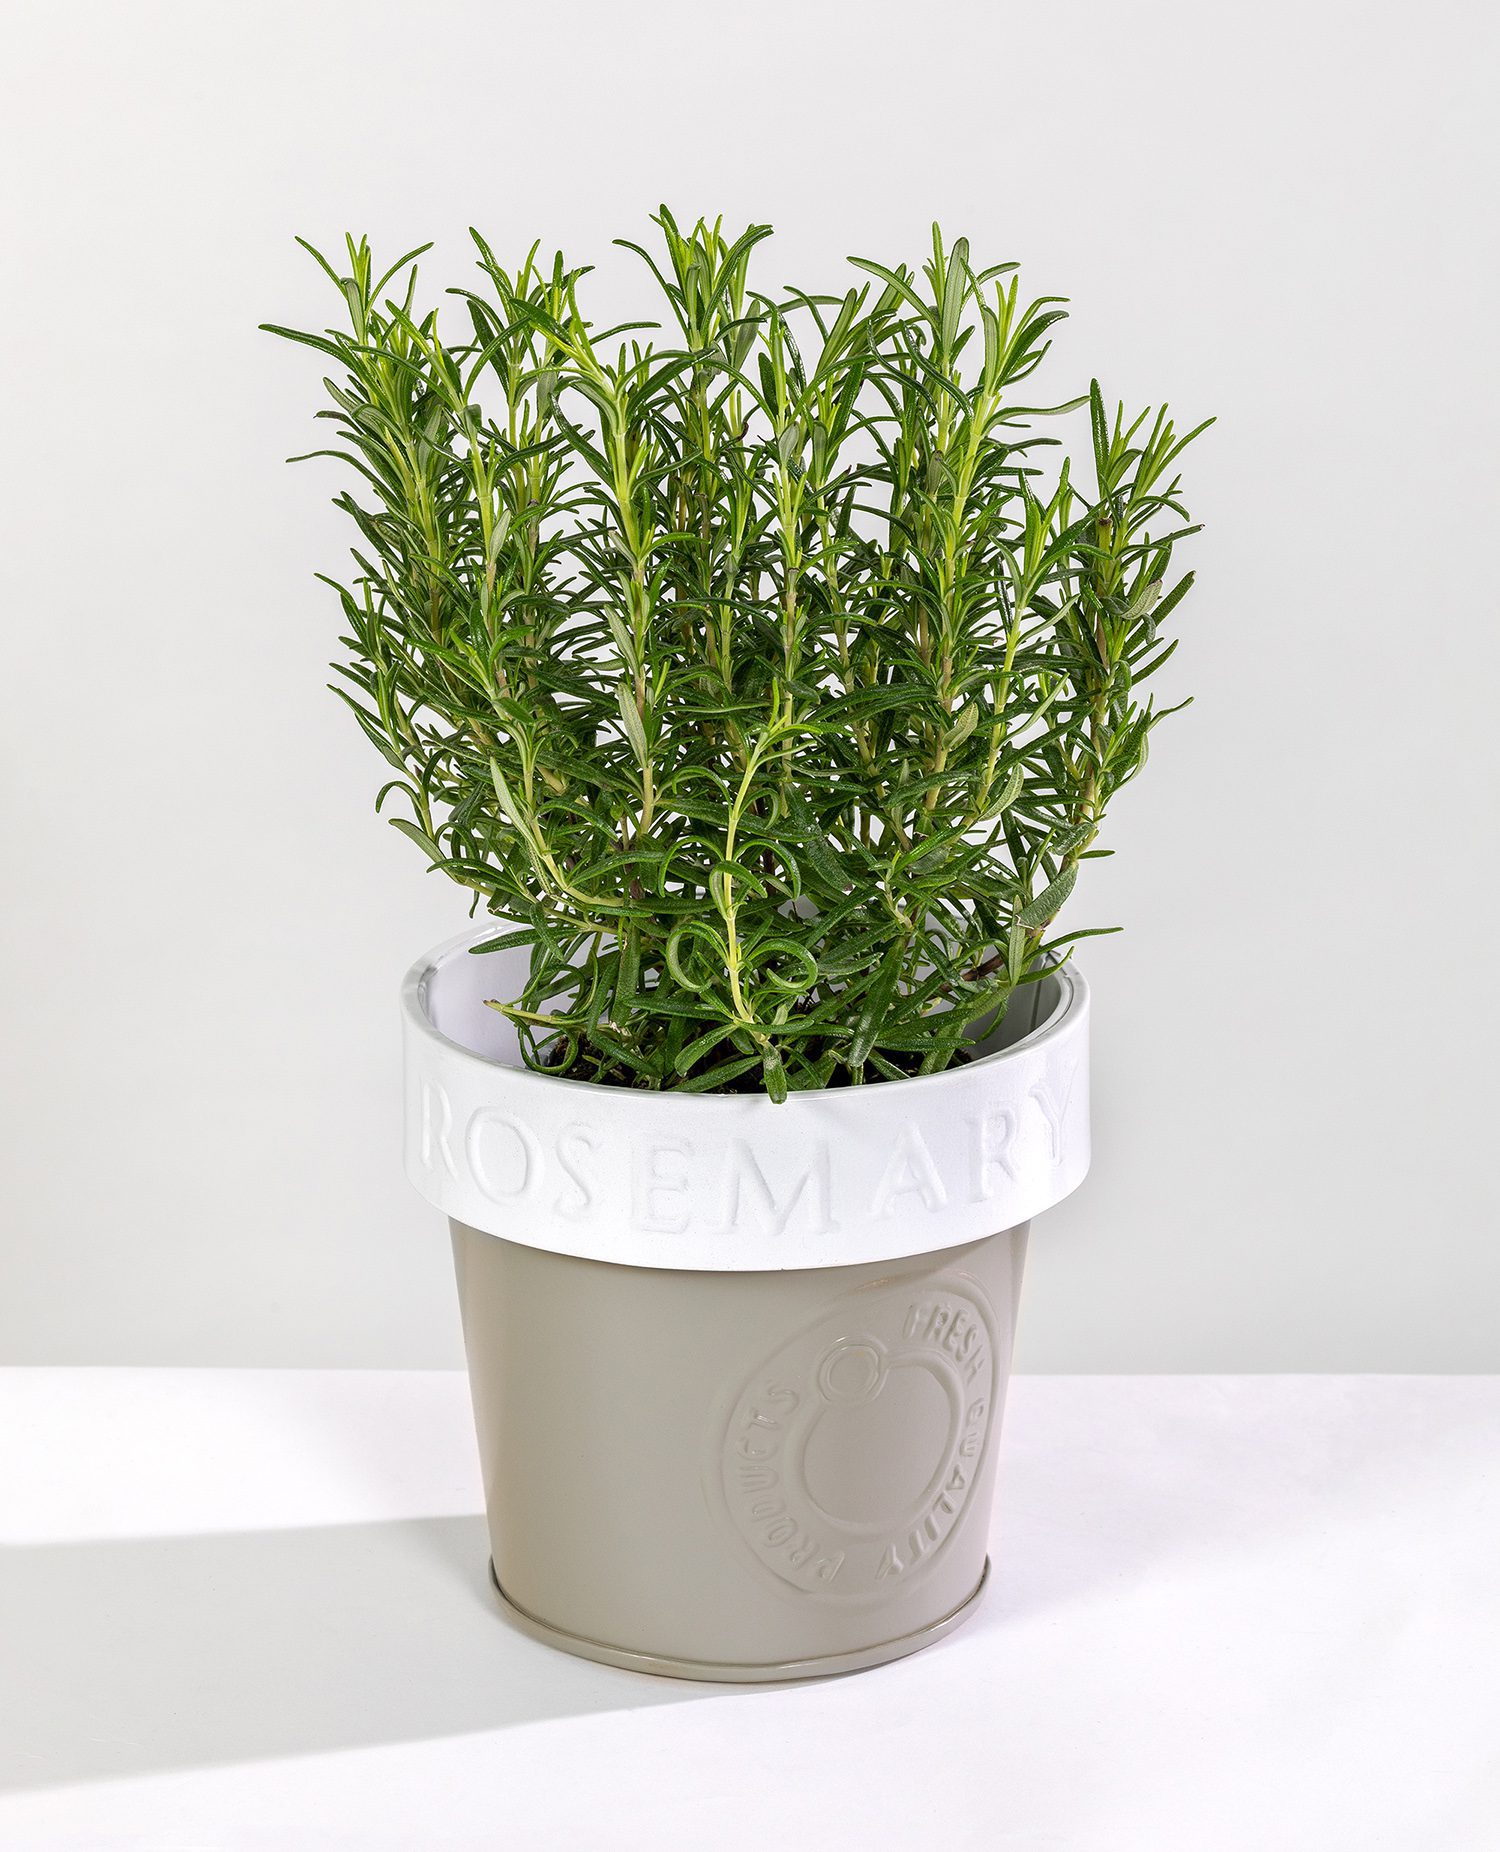 This metal herb pot "rosemary" look lovely on the kitchen sill with herbs in it